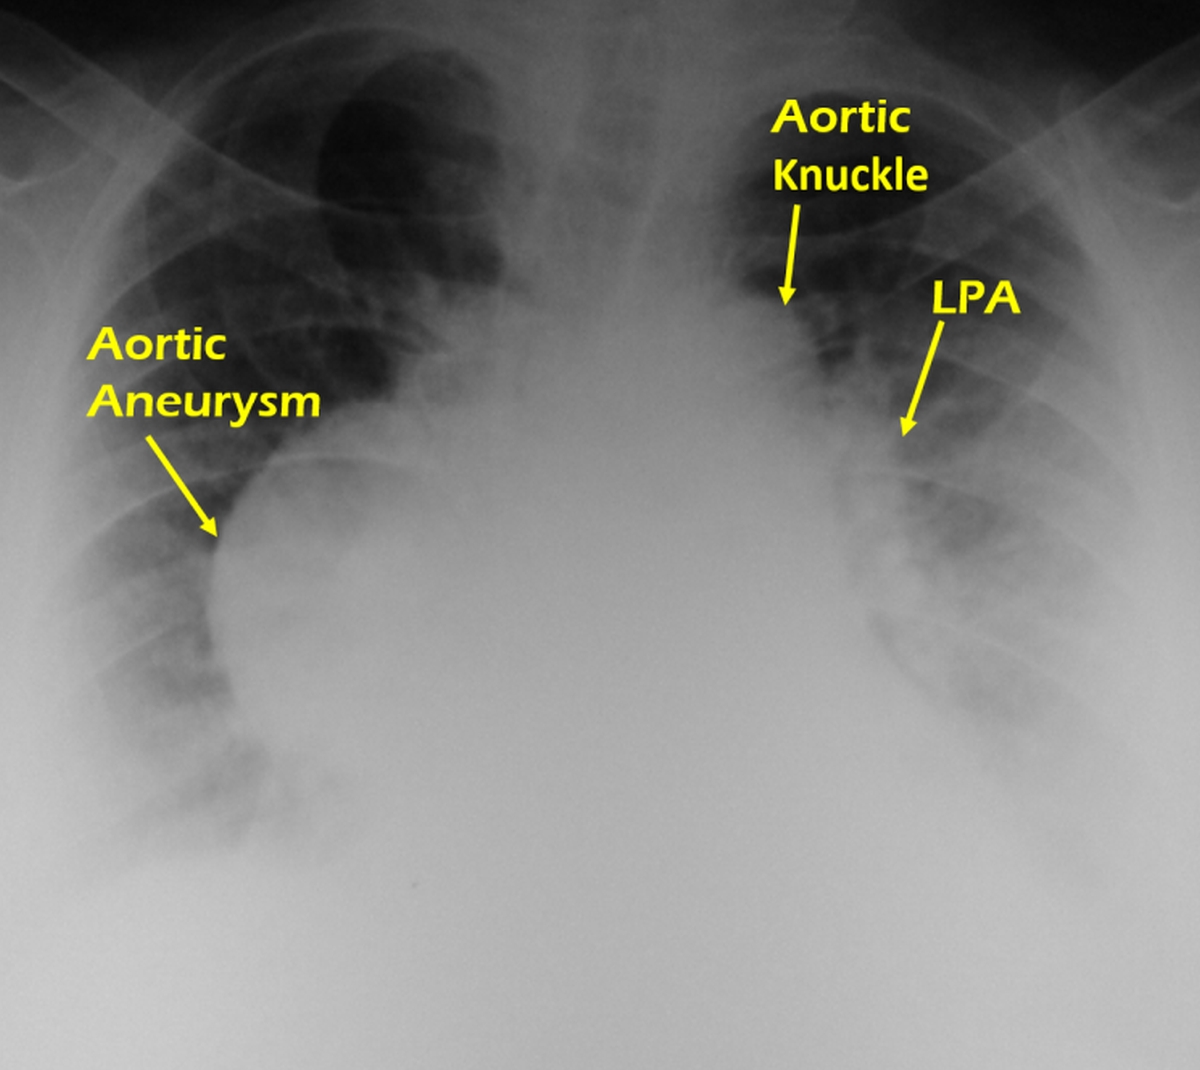 X-ray chest PA view in aortic aneurysm